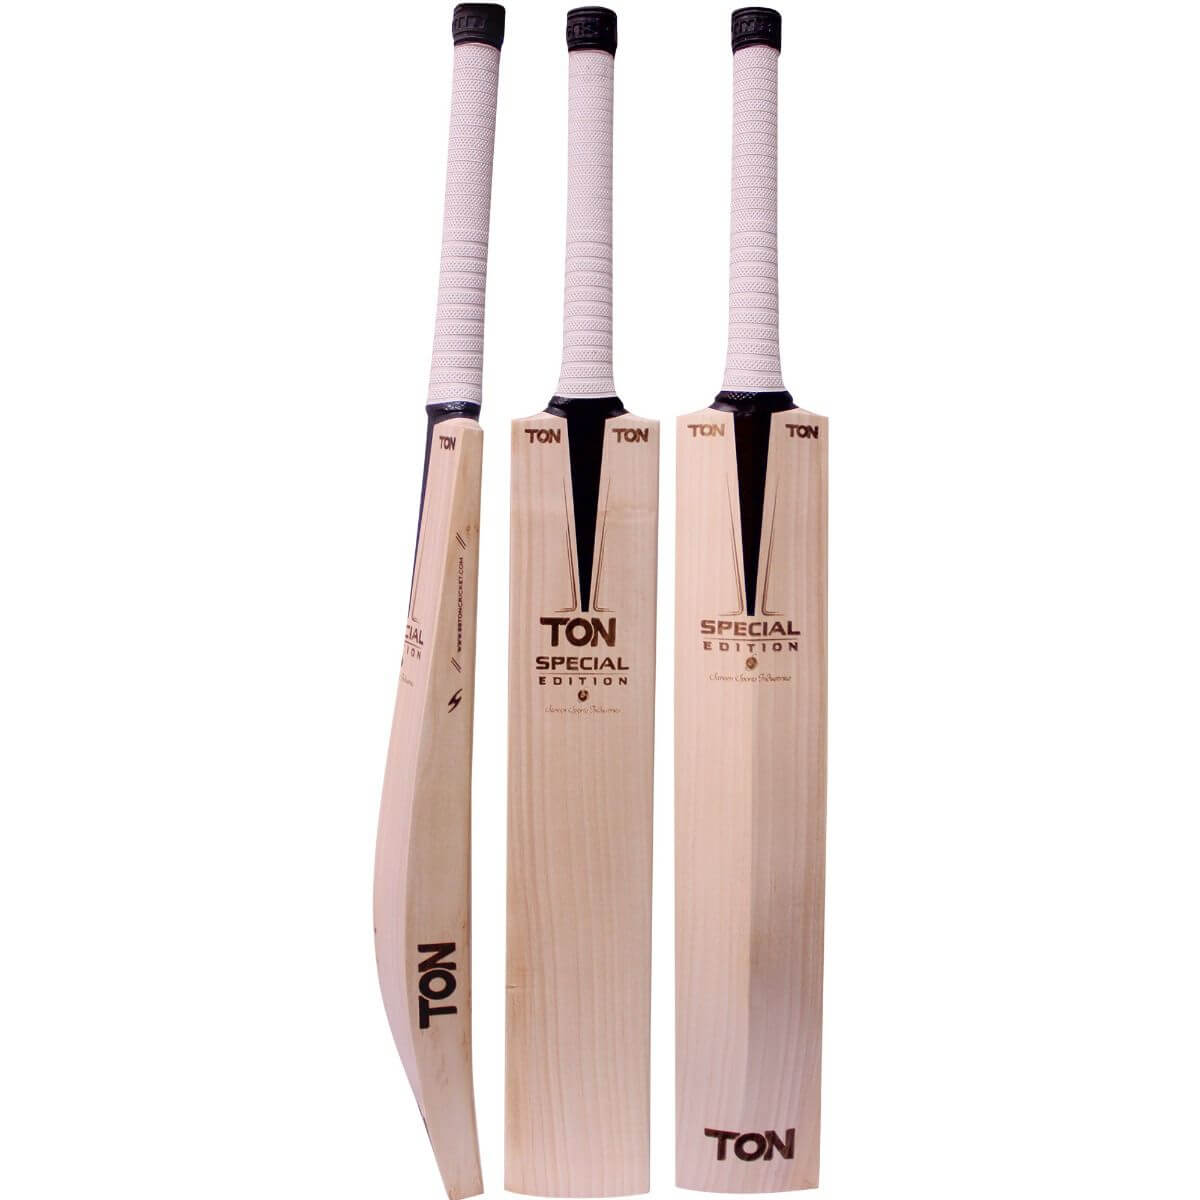 SS Ton Special Edition English Willow Cricket Bat